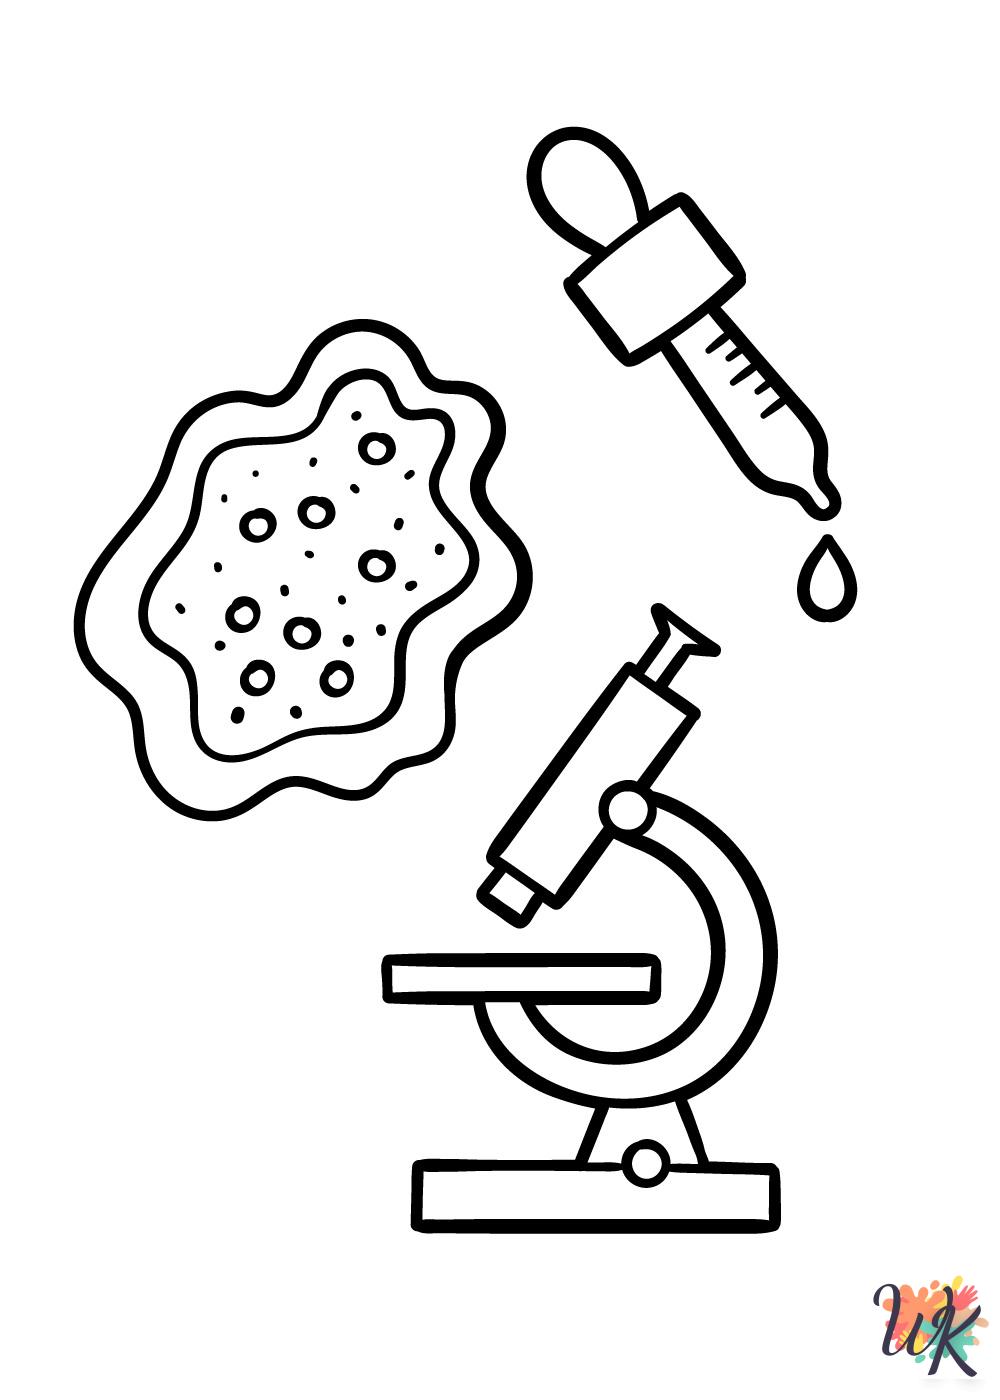 Science coloring pages pdf